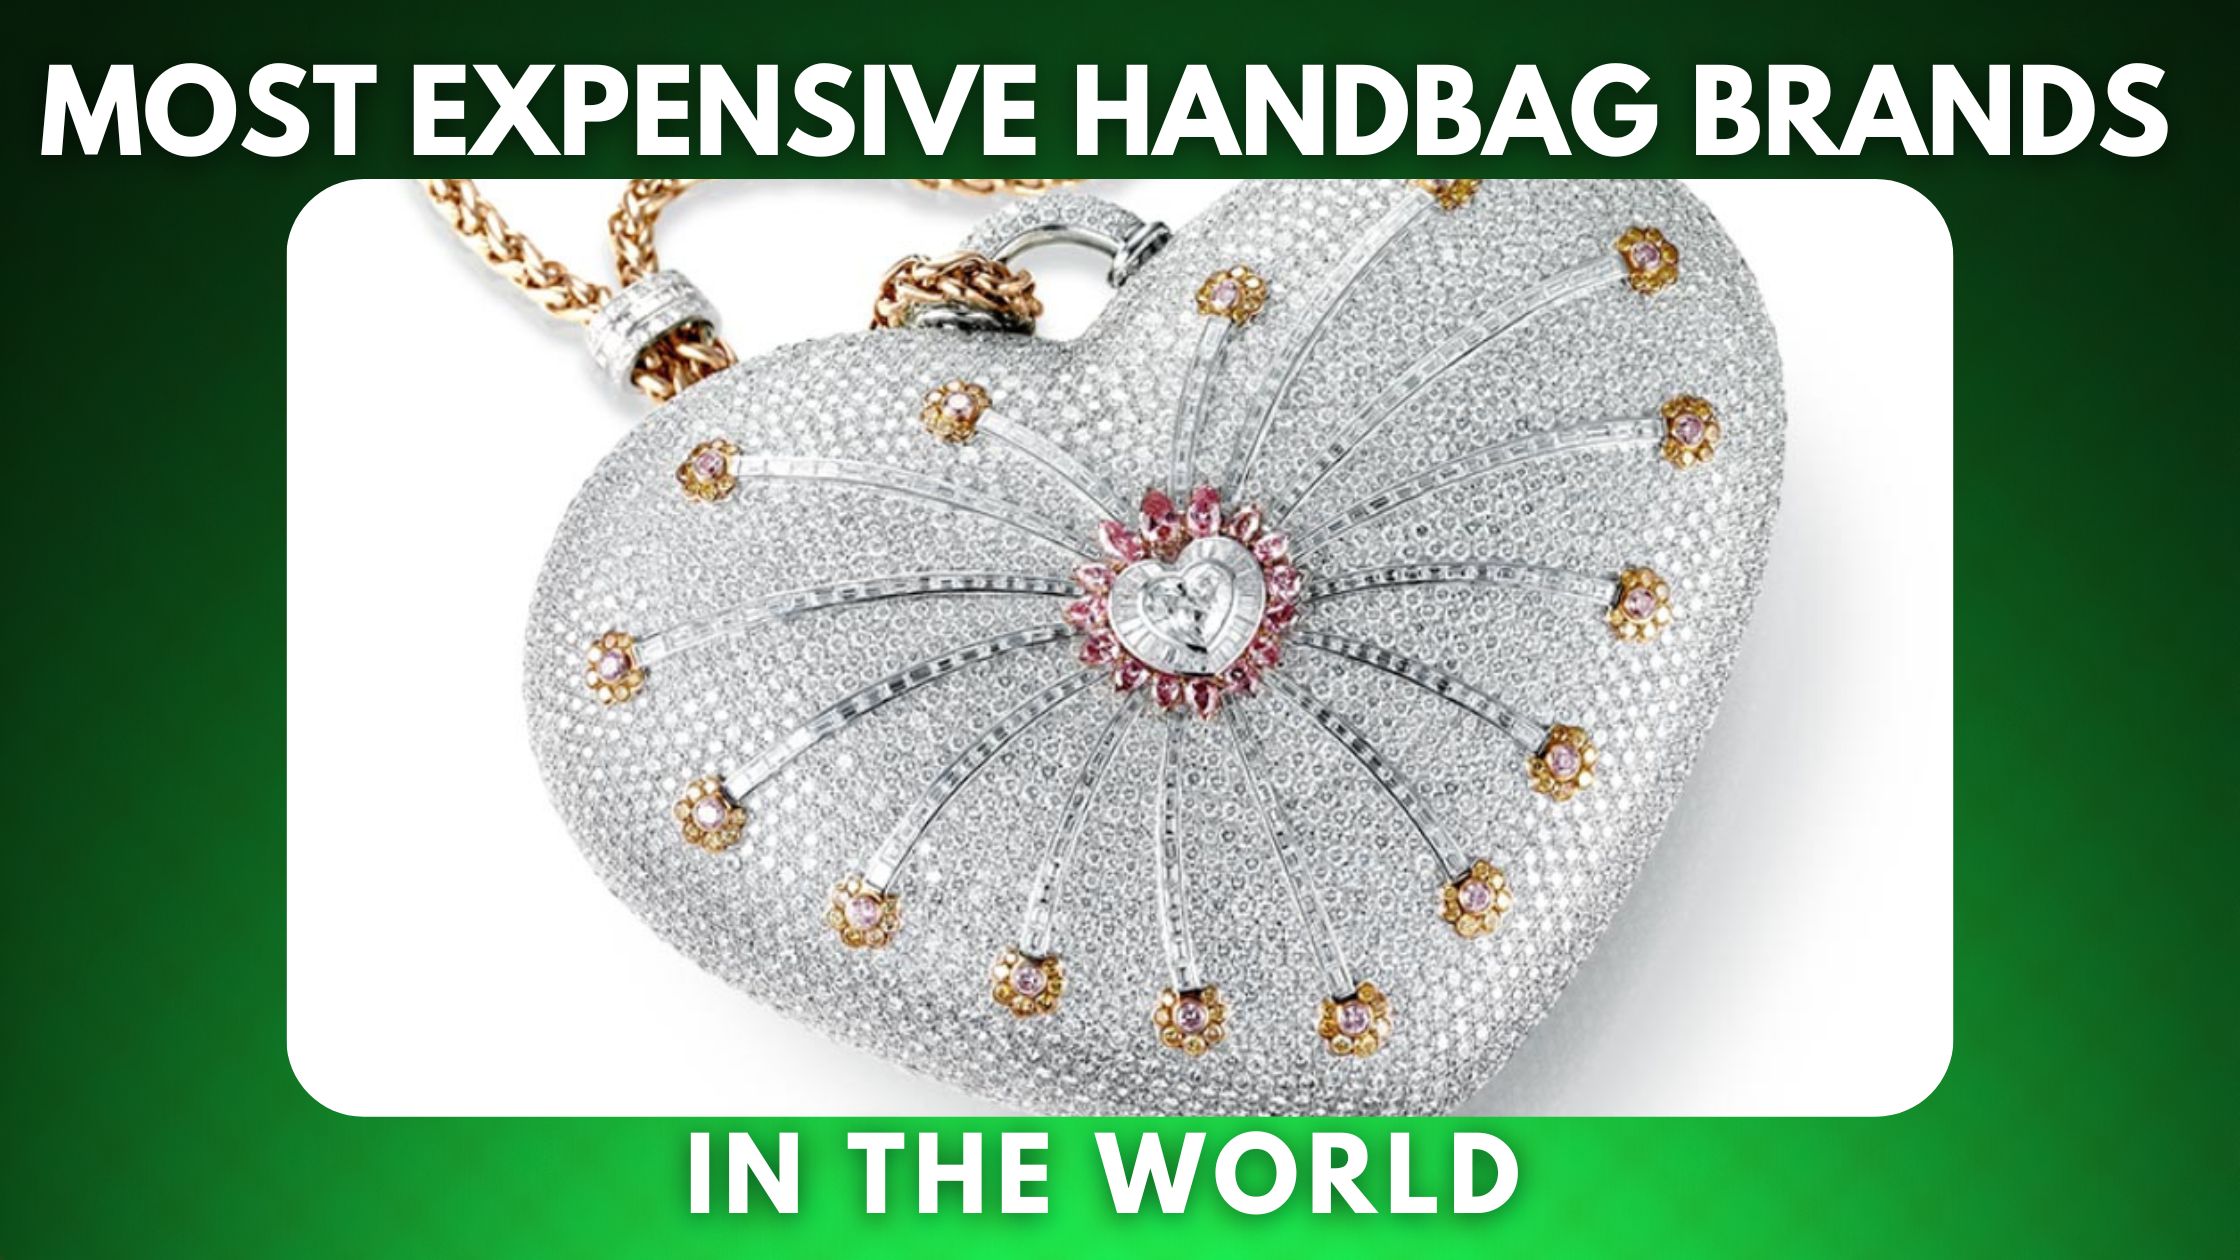 This is the most expensive handbag in the world